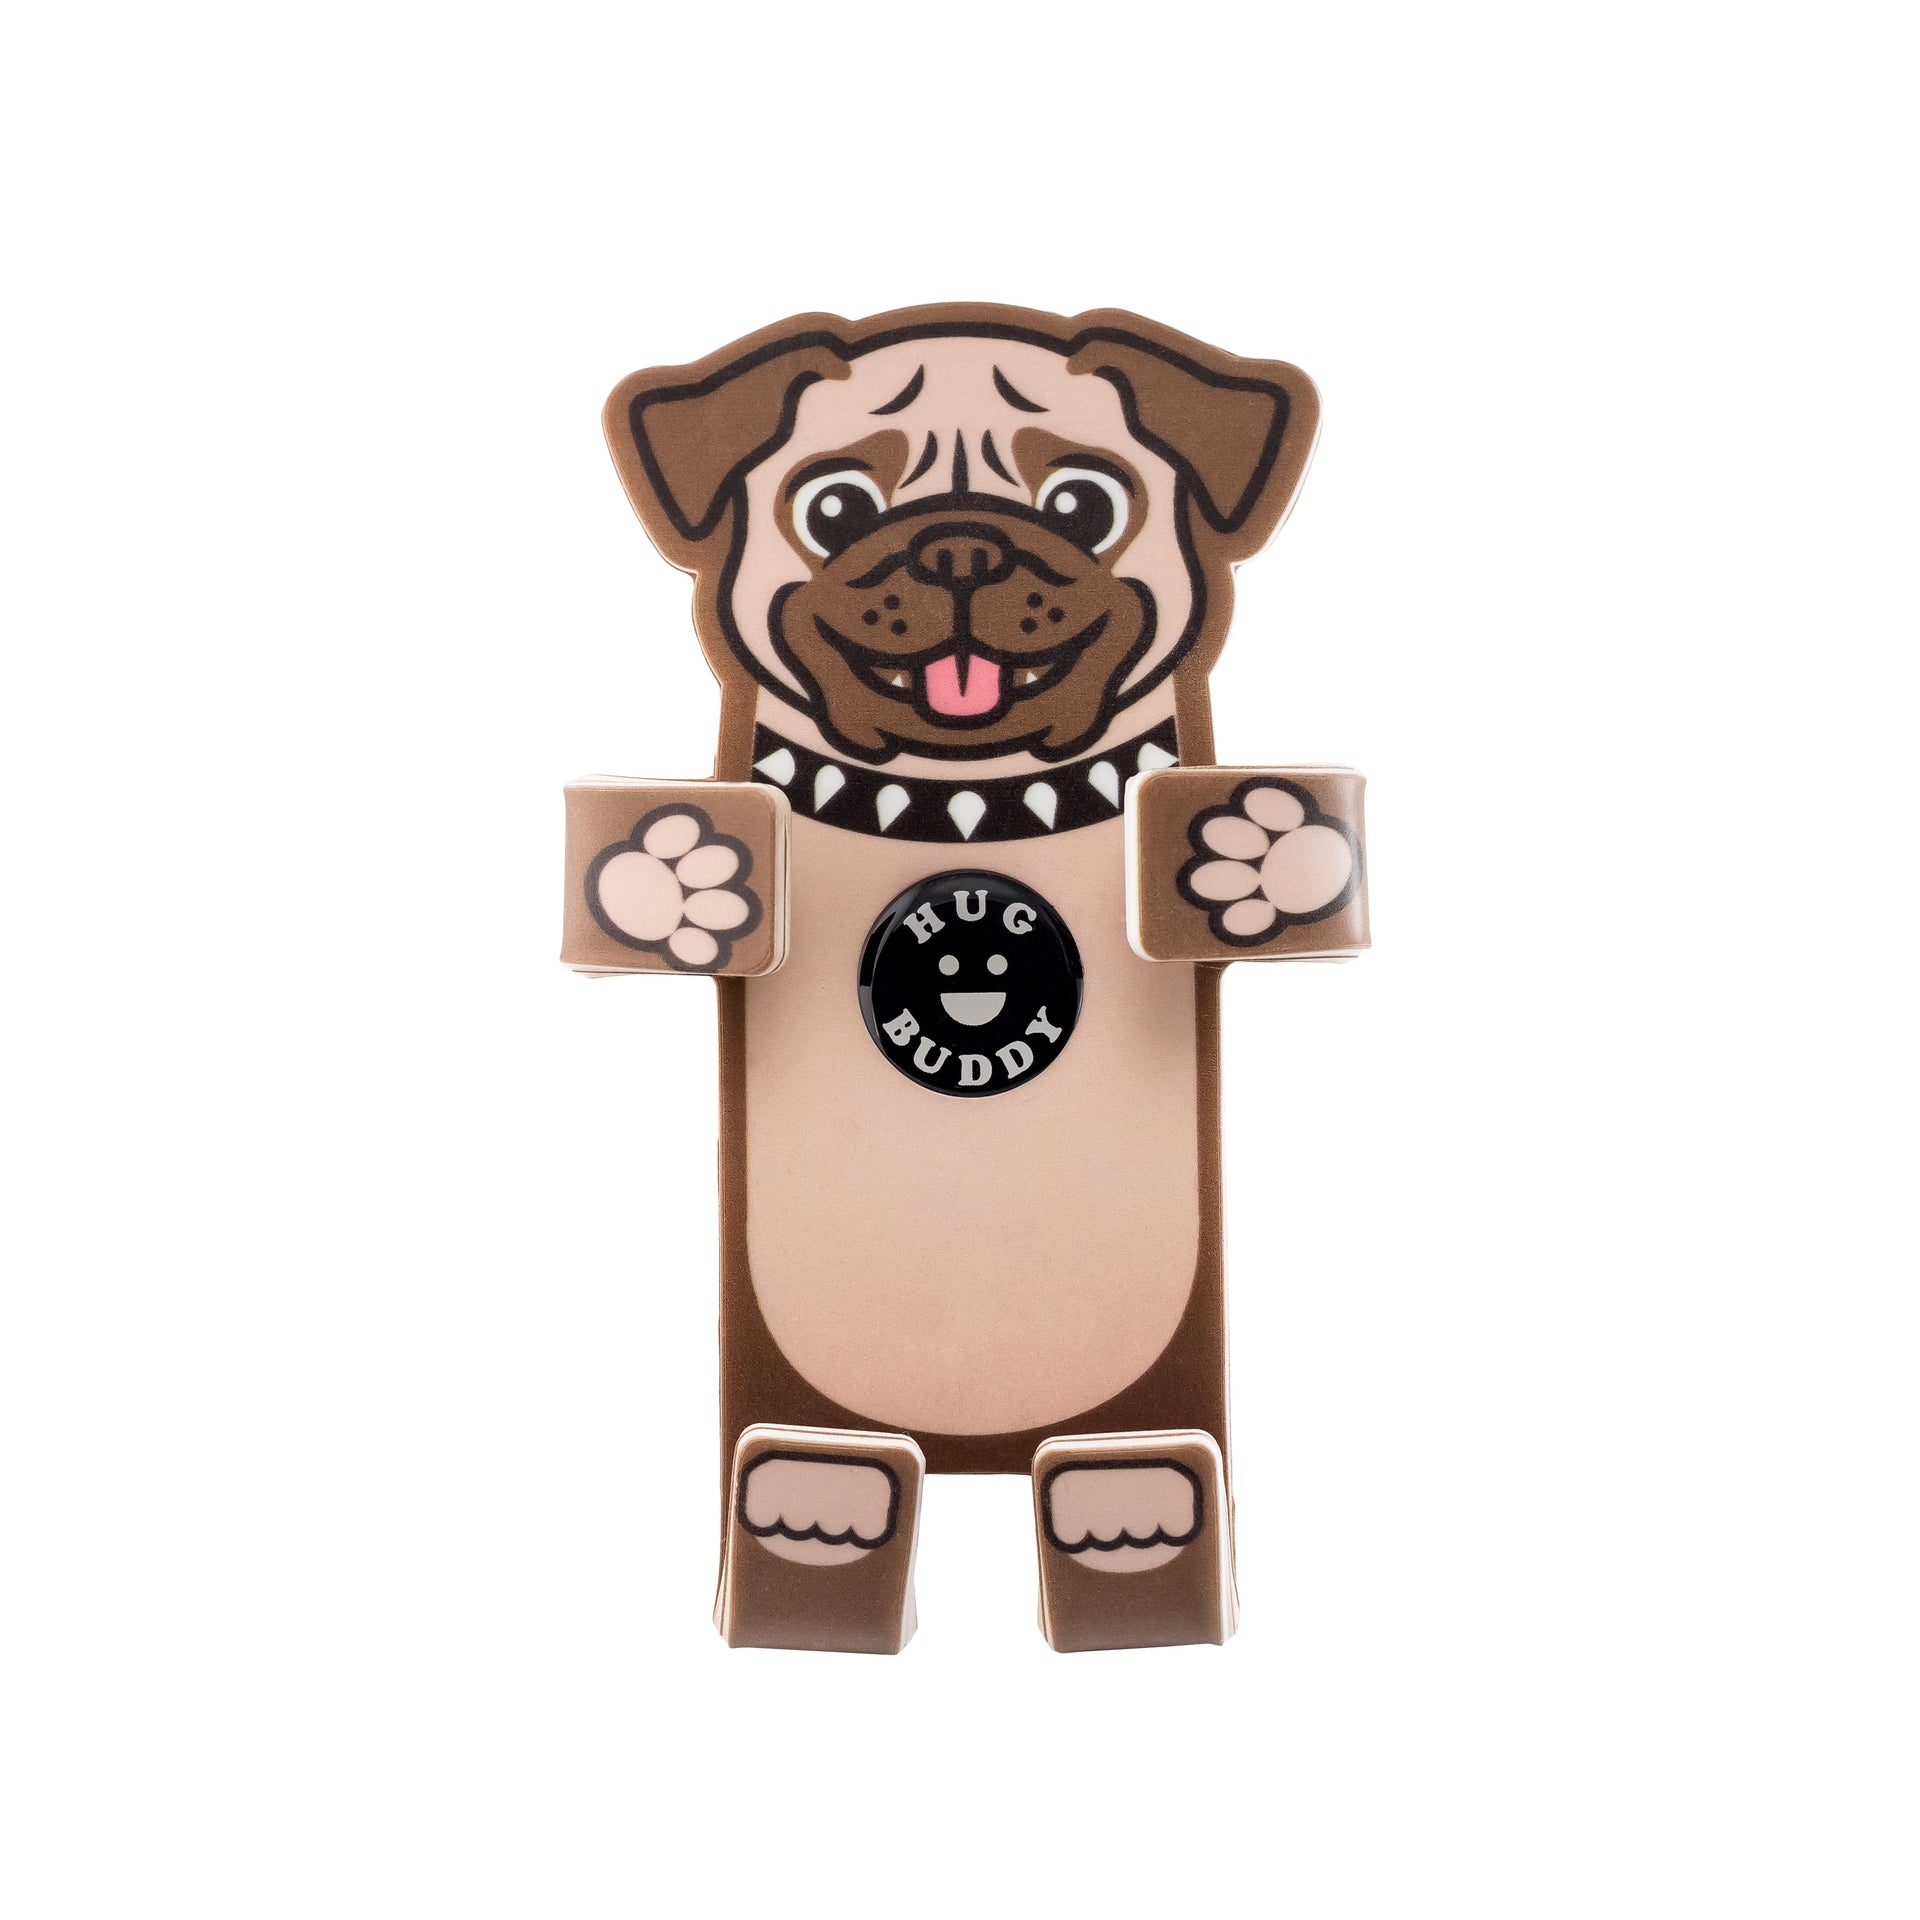 Image of Pug the dog Hug Buddy with arms and legs in the folded closed position on a white background